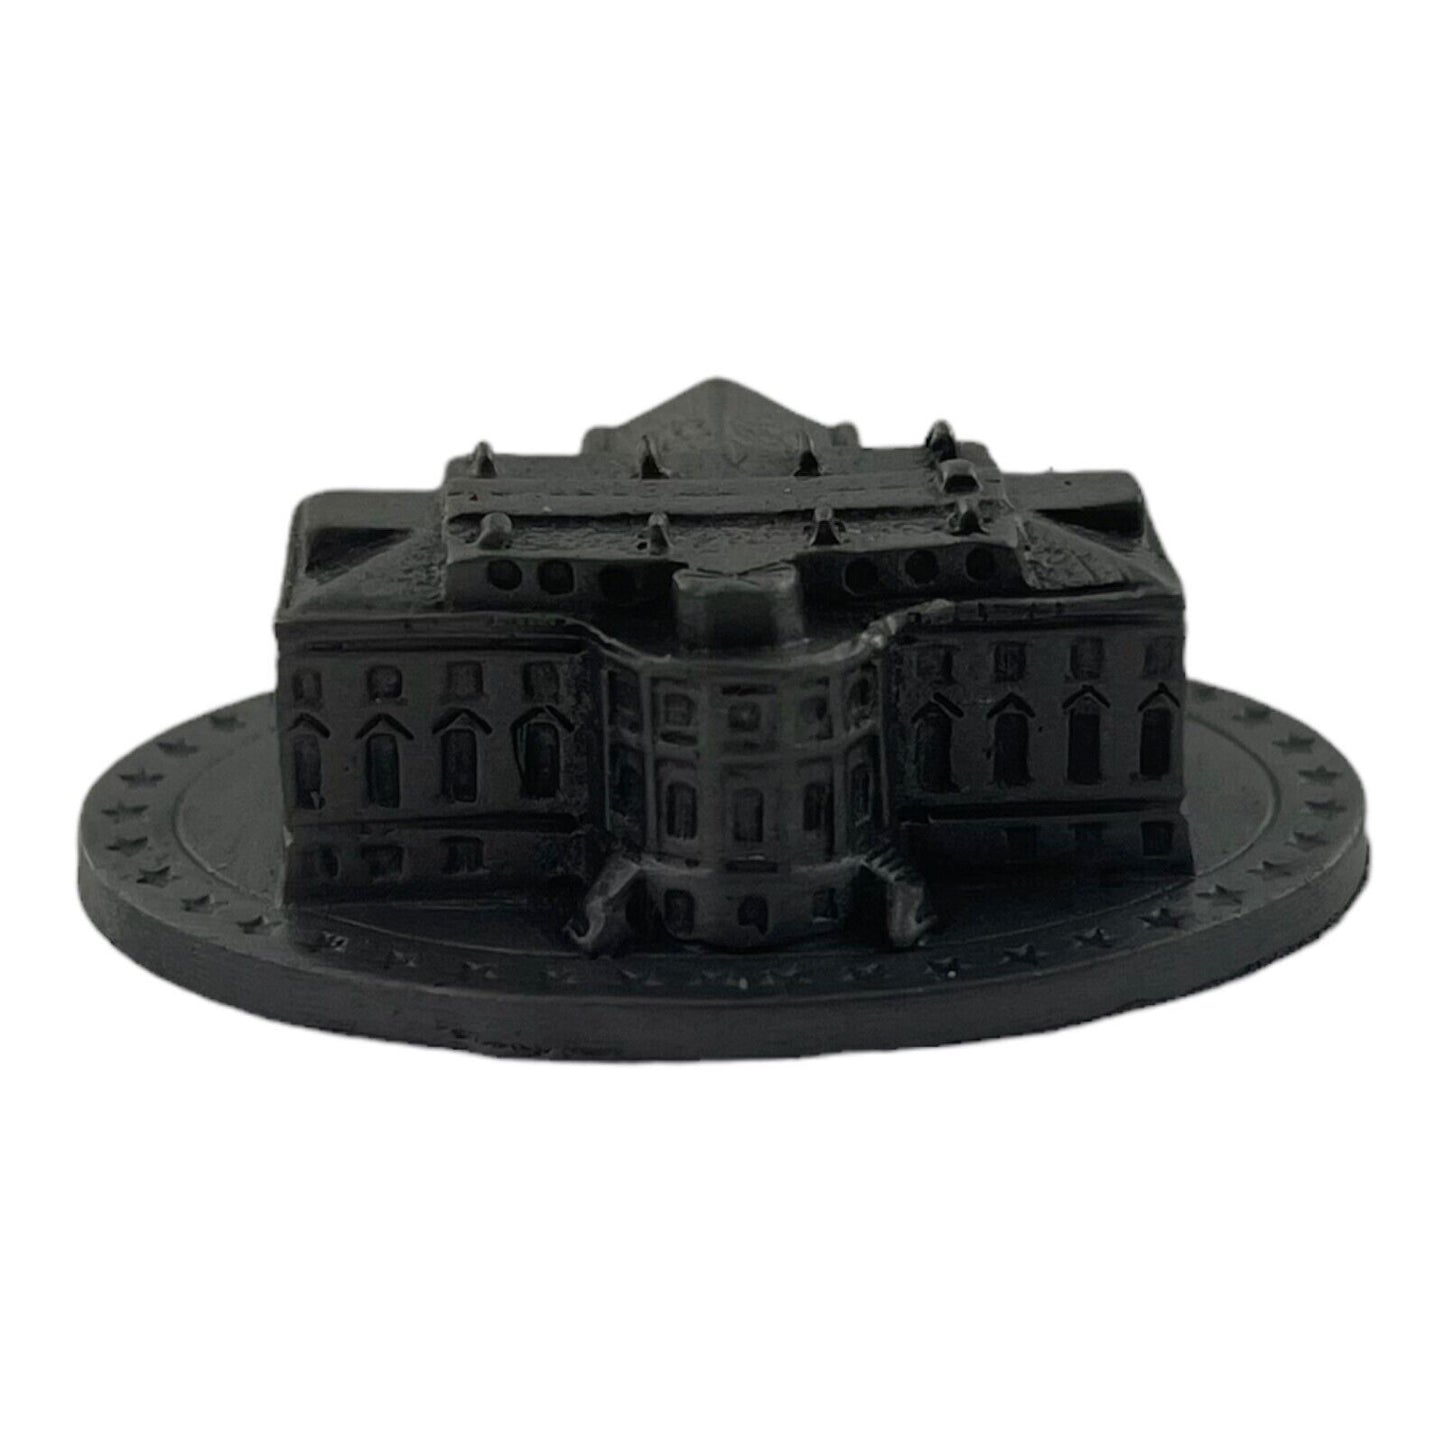 White House 1.75 Inch Pewter Figurine Made in USA